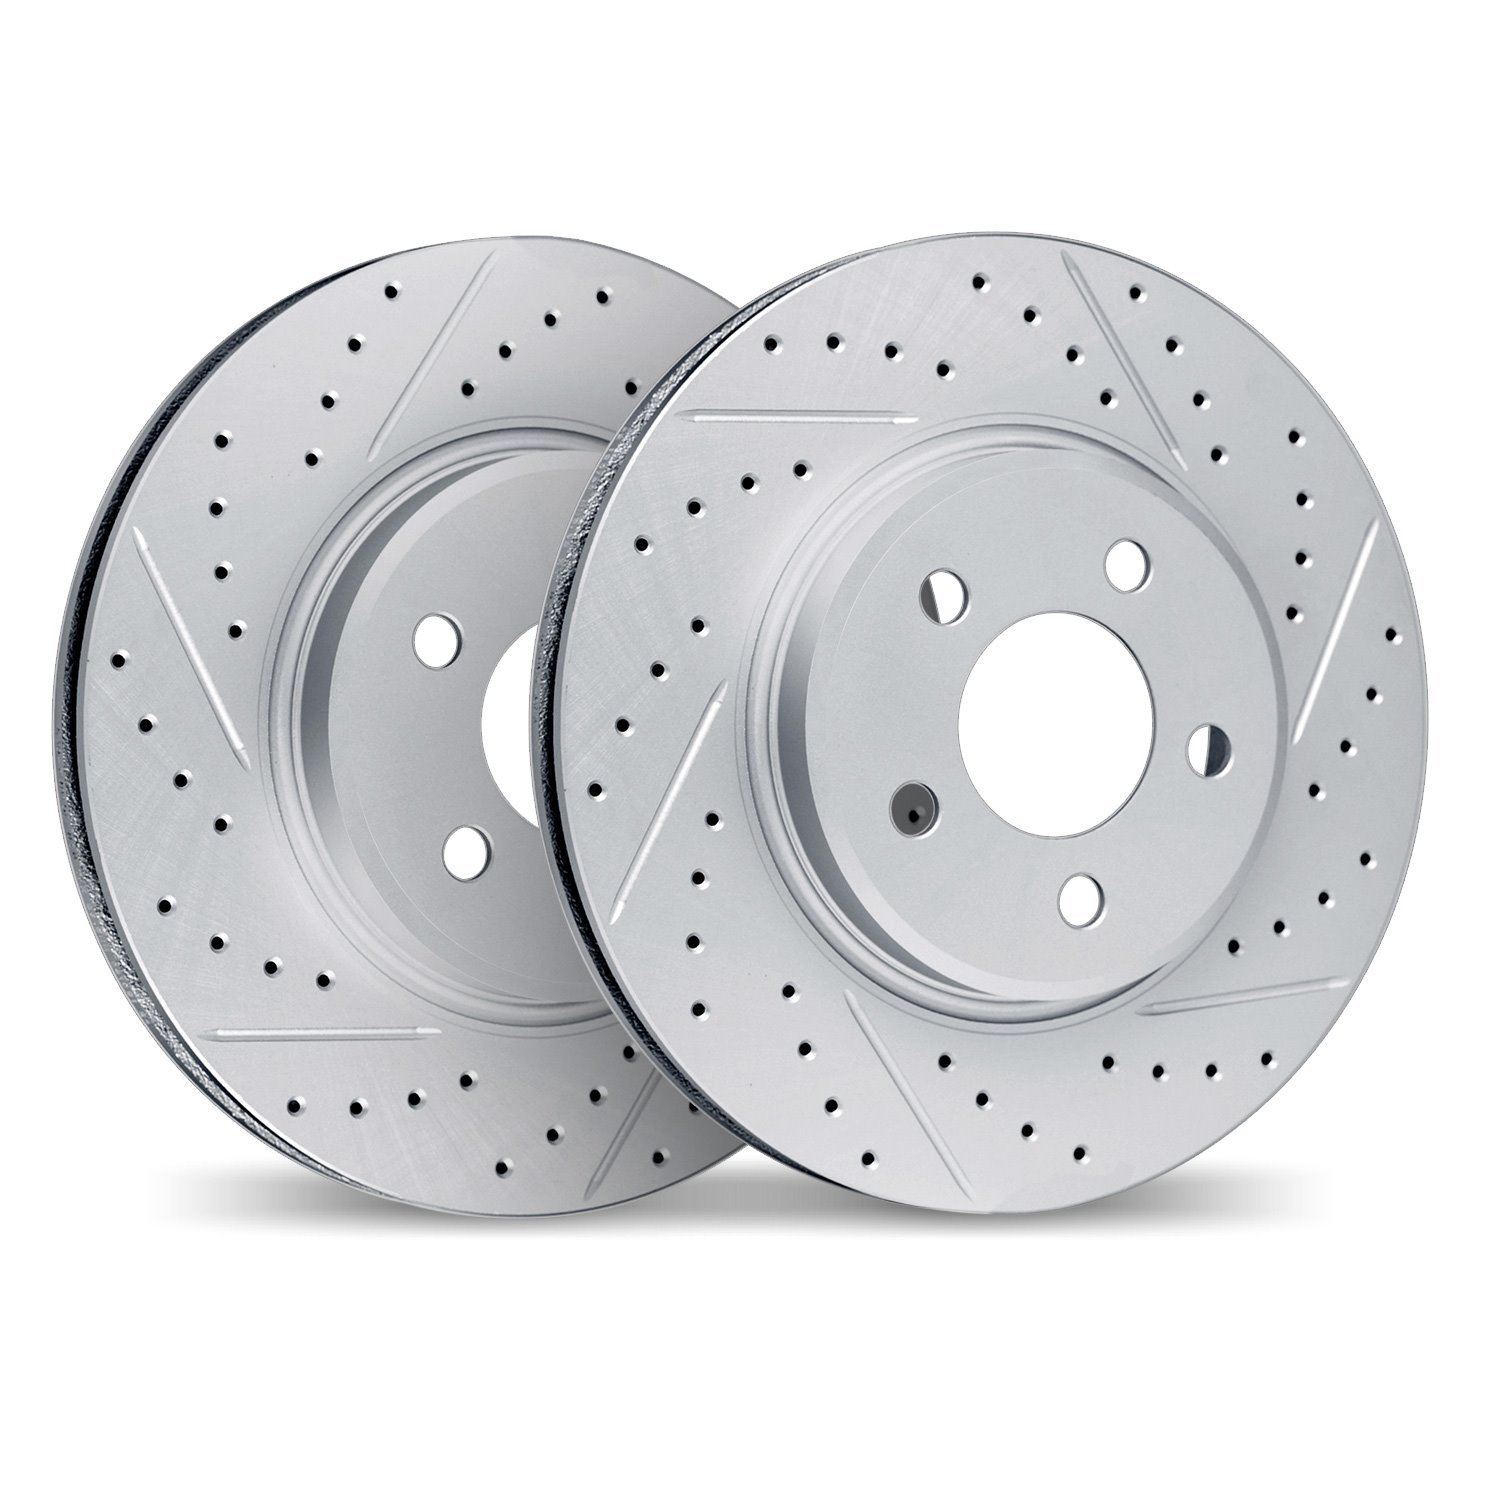 2002-31051 Geoperformance Drilled/Slotted Brake Rotors, 2011-2016 BMW, Position: Front